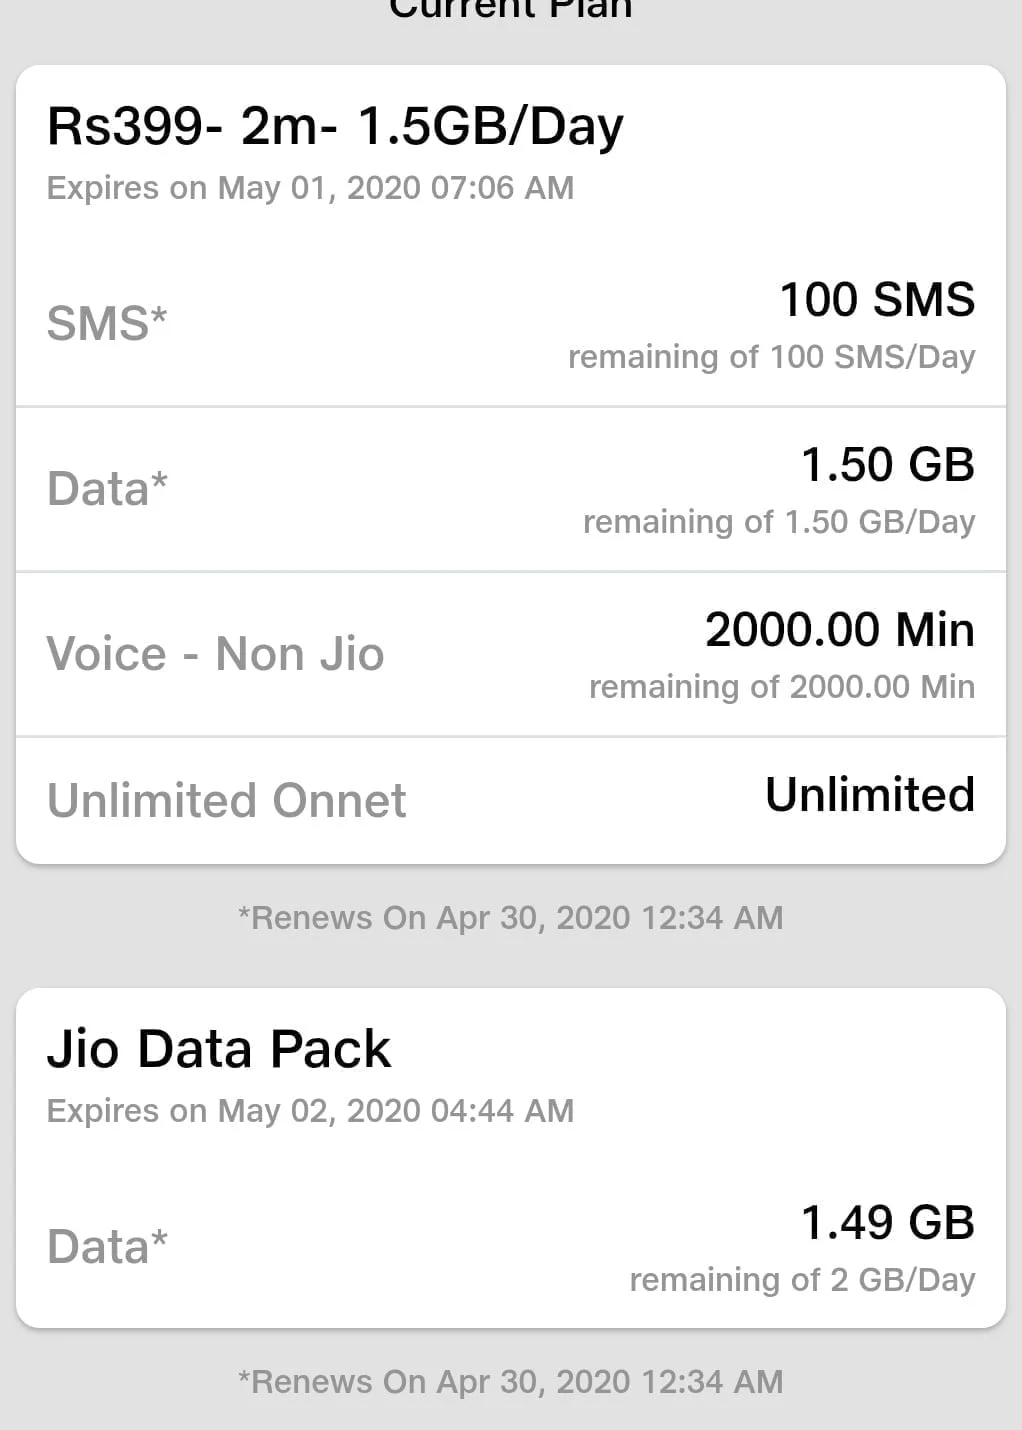 Reliance Jio offering free 2 GB per day data to random users